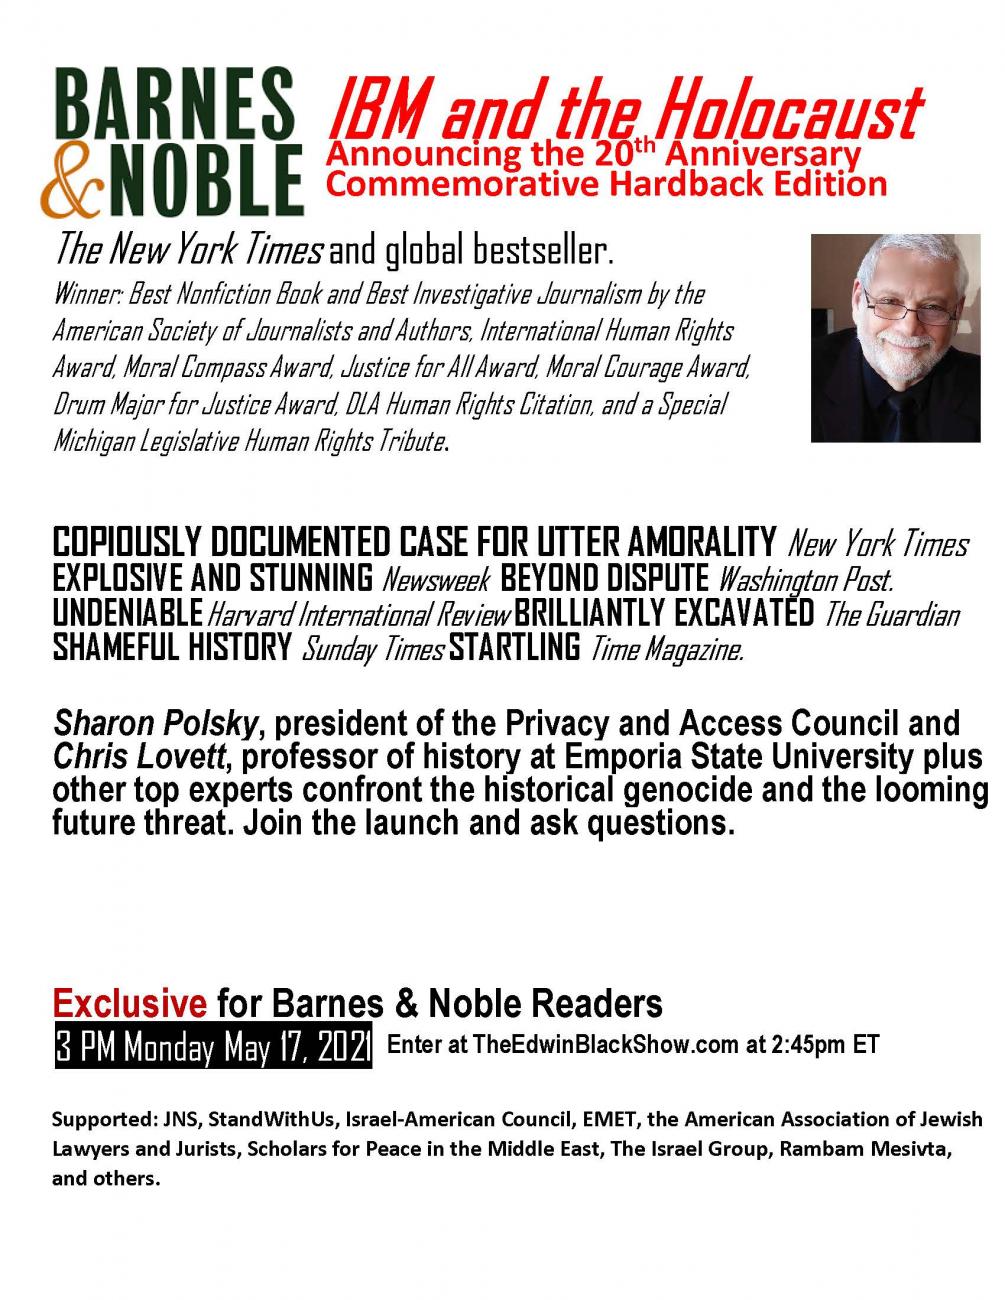 Barnes & Noble Event: IBM and the Holocaust 20th Anniversary